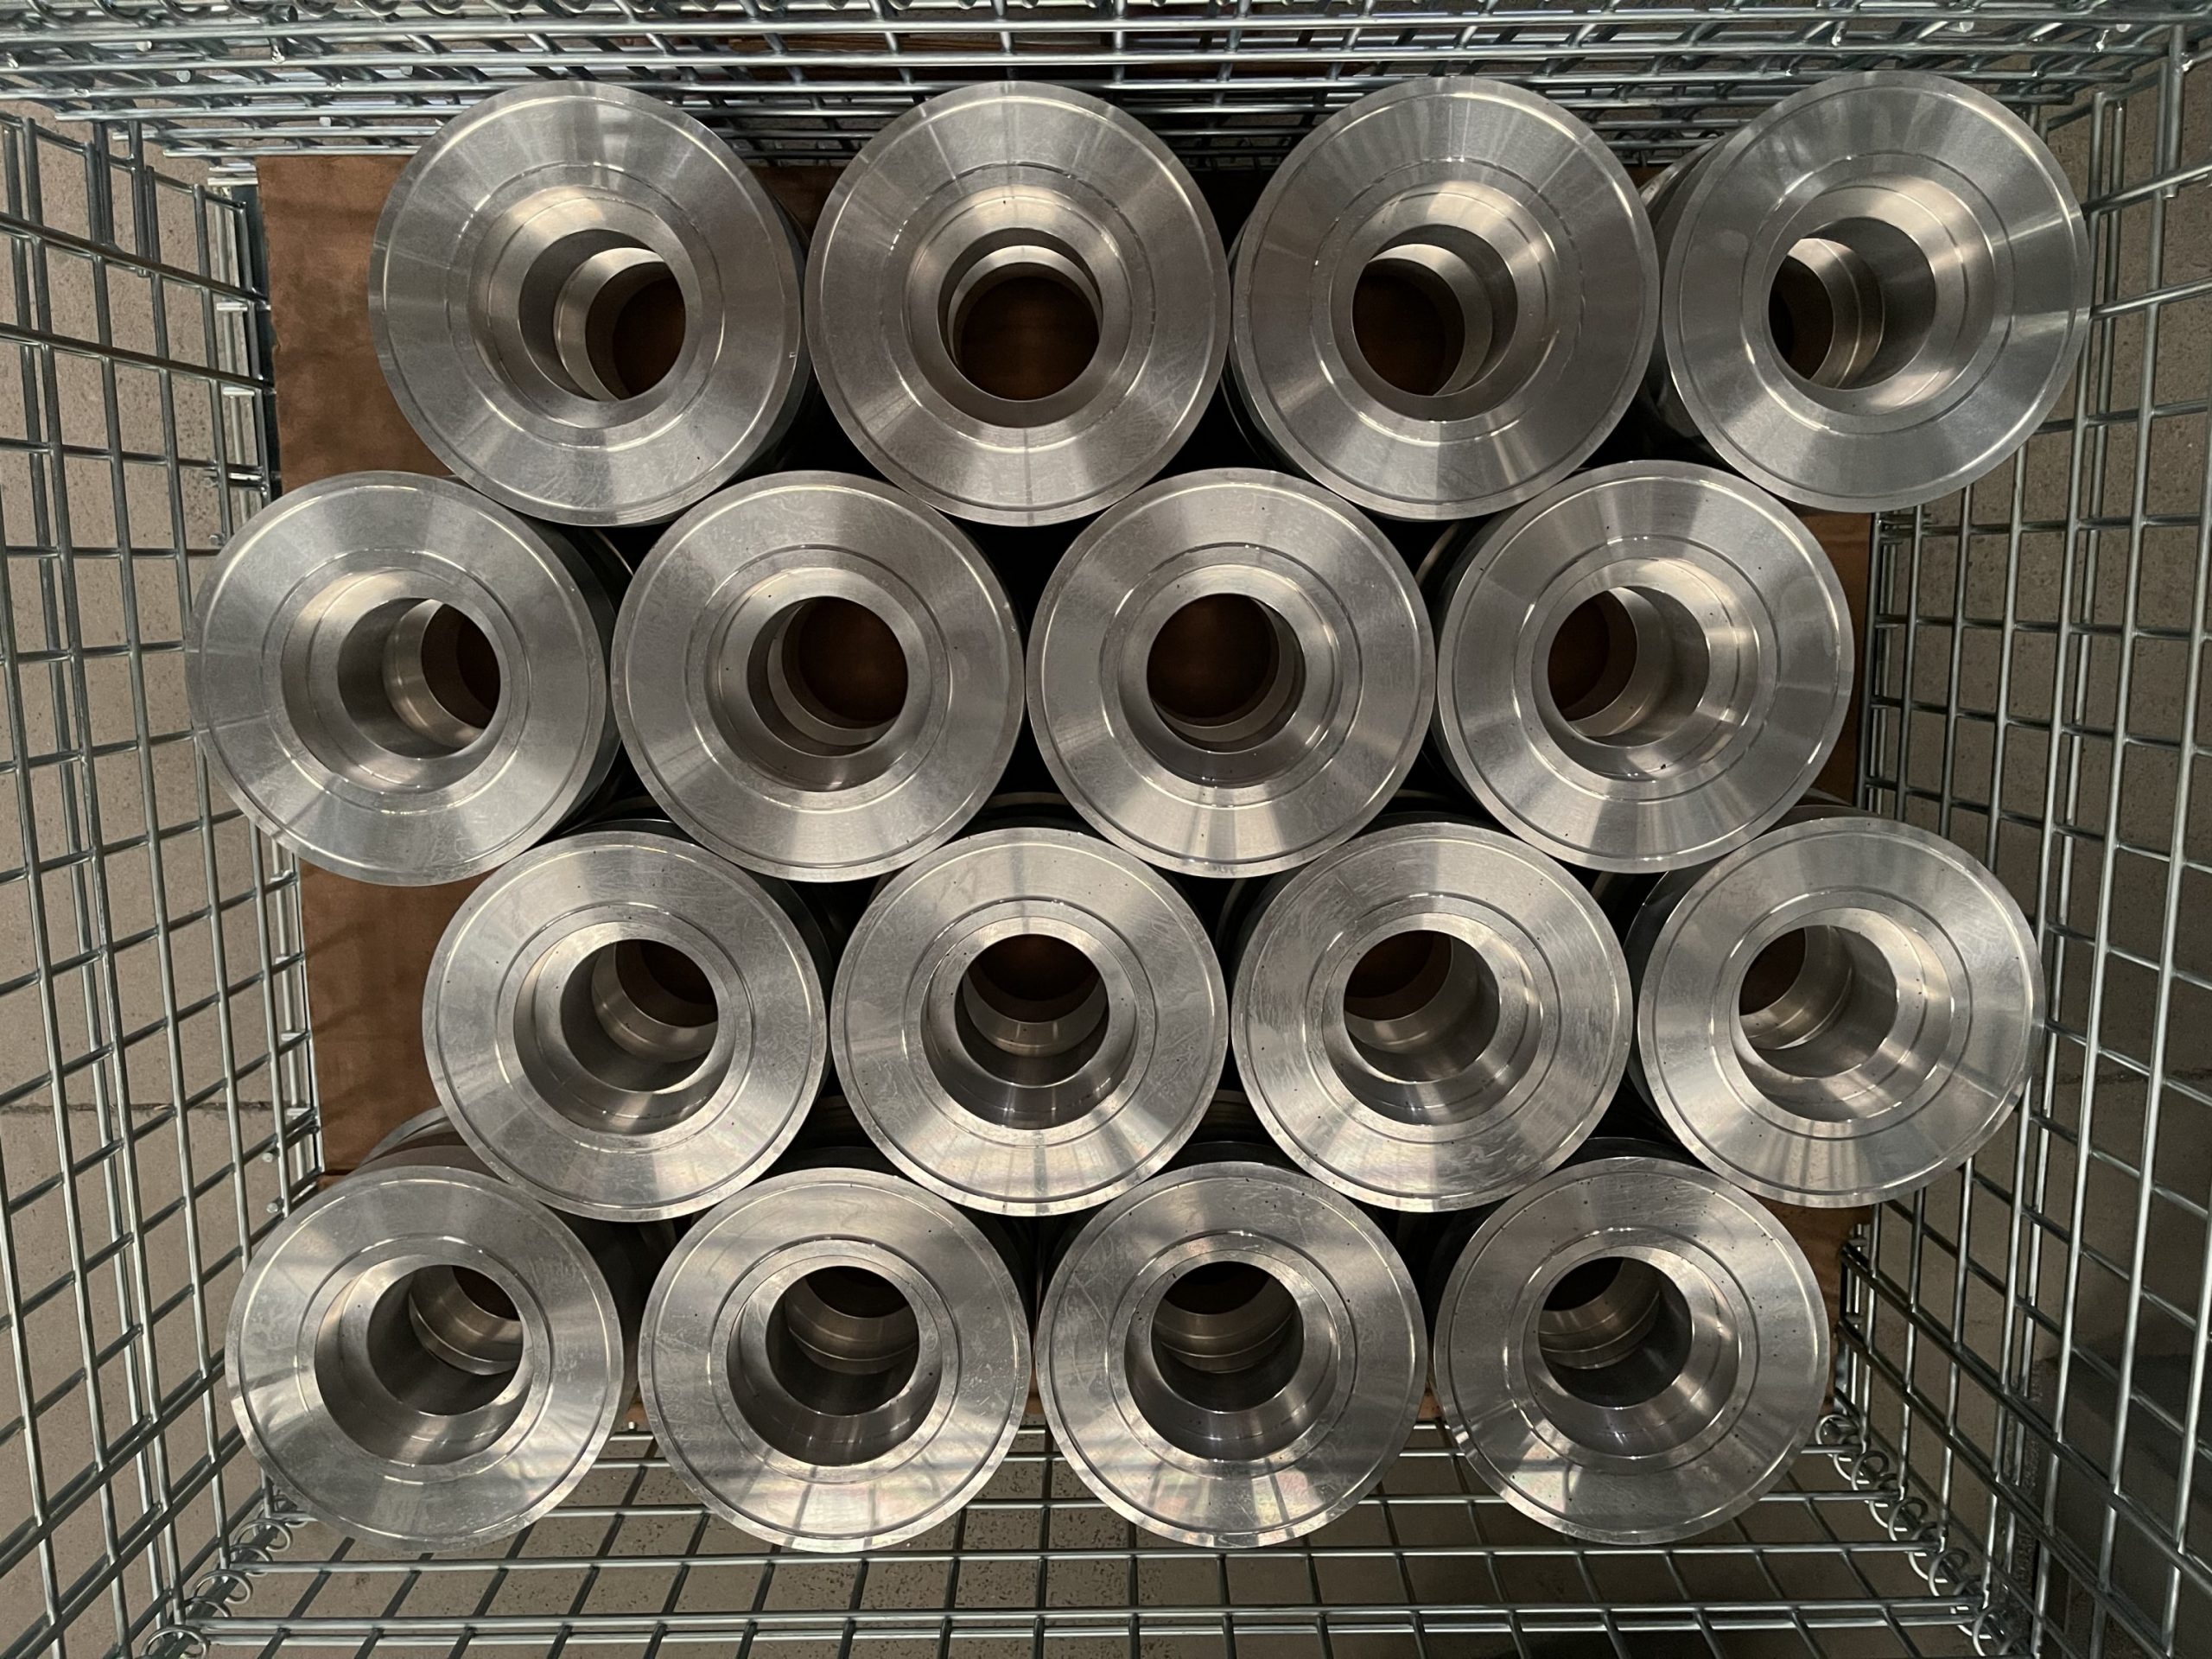 Four rows of stacked wheels